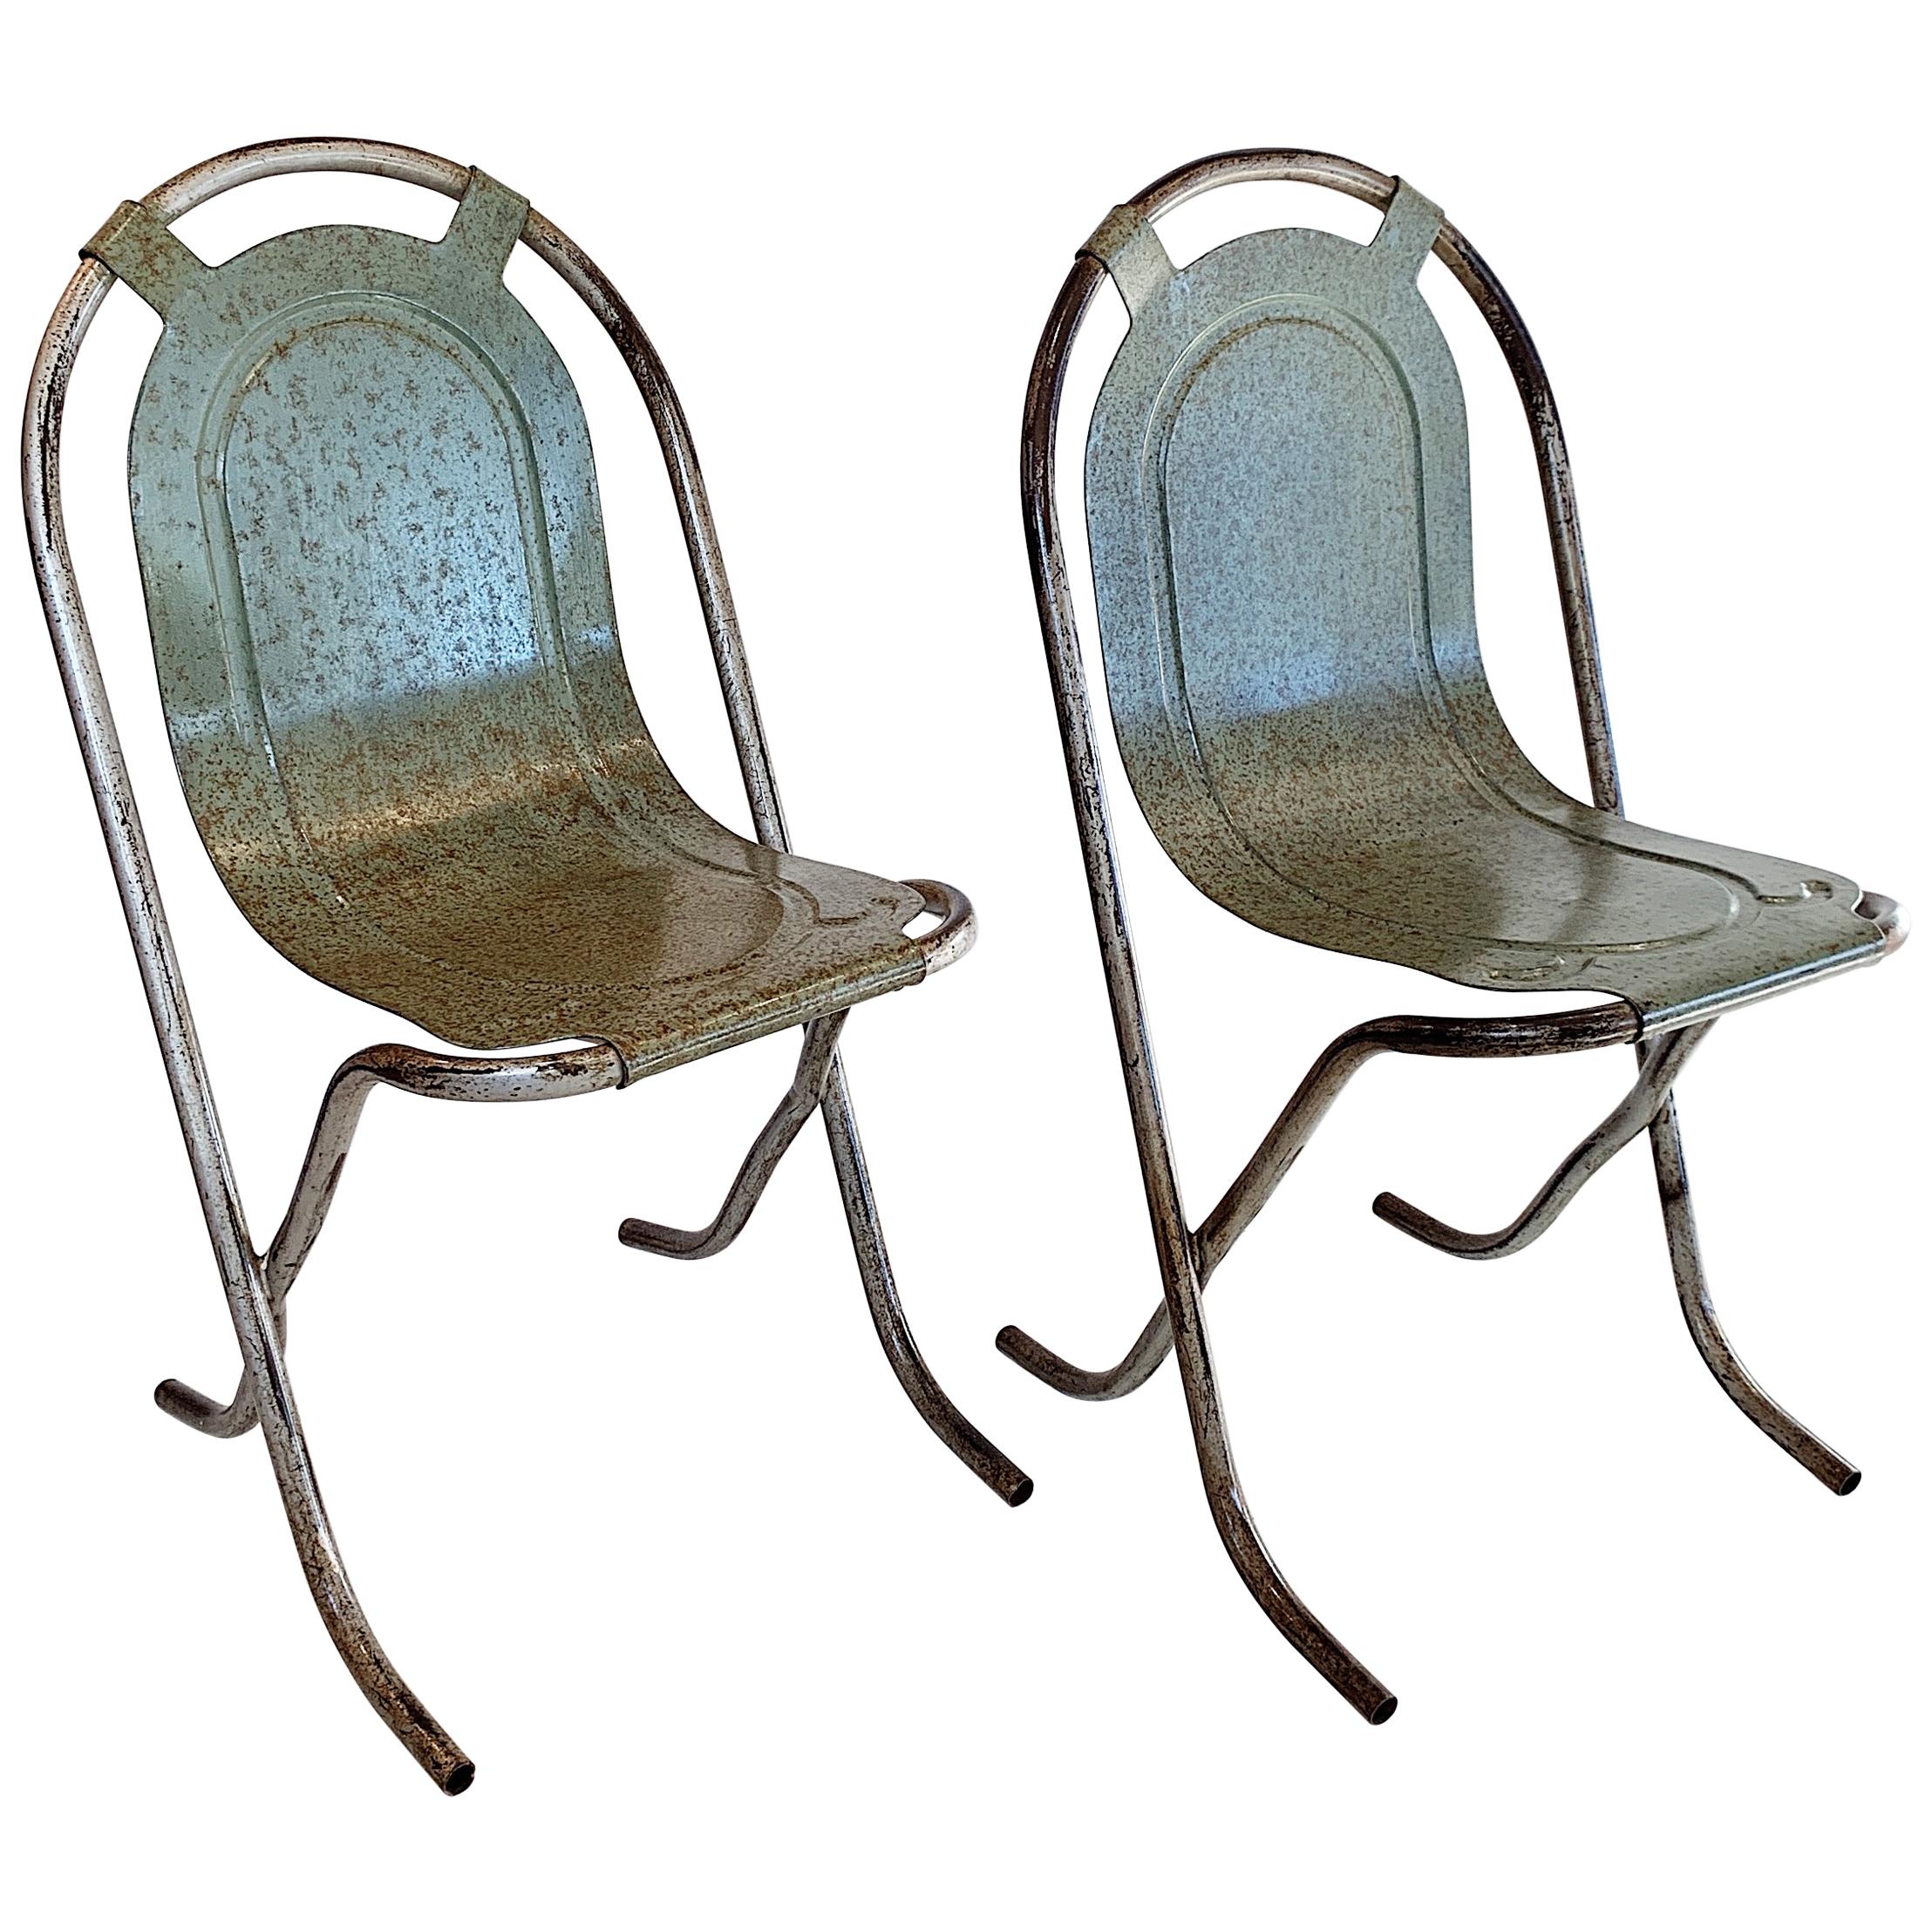 Post-War Sebel Stak-a-bye Garden Chairs with Steel Blue Pressed Metal Seats